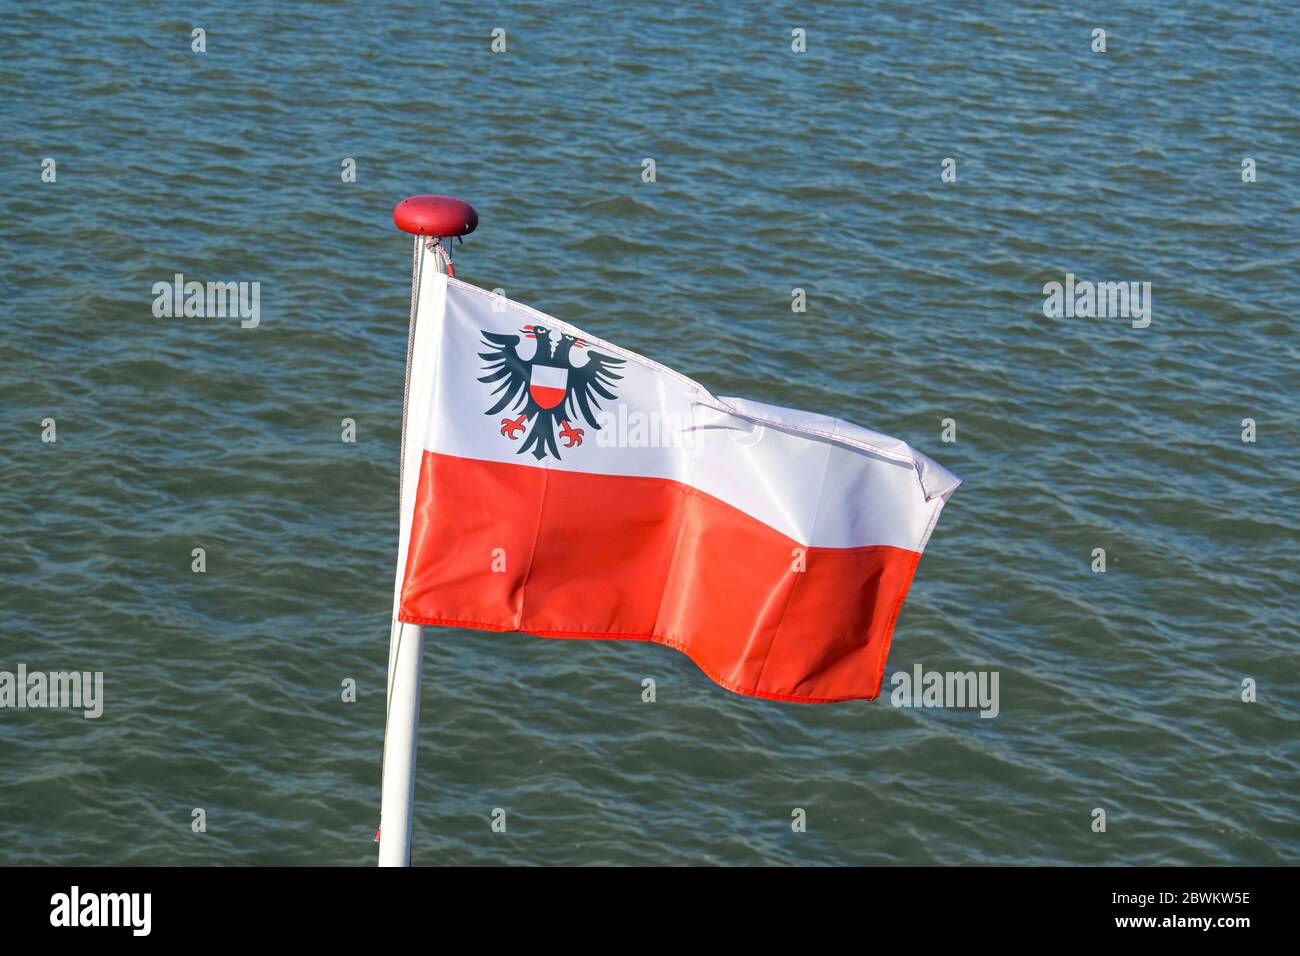 Flag of the Hanseatic city of Luebeck with the double eagle on white and red stripe is fluttering at the stern of a boat against the water Stock Photo